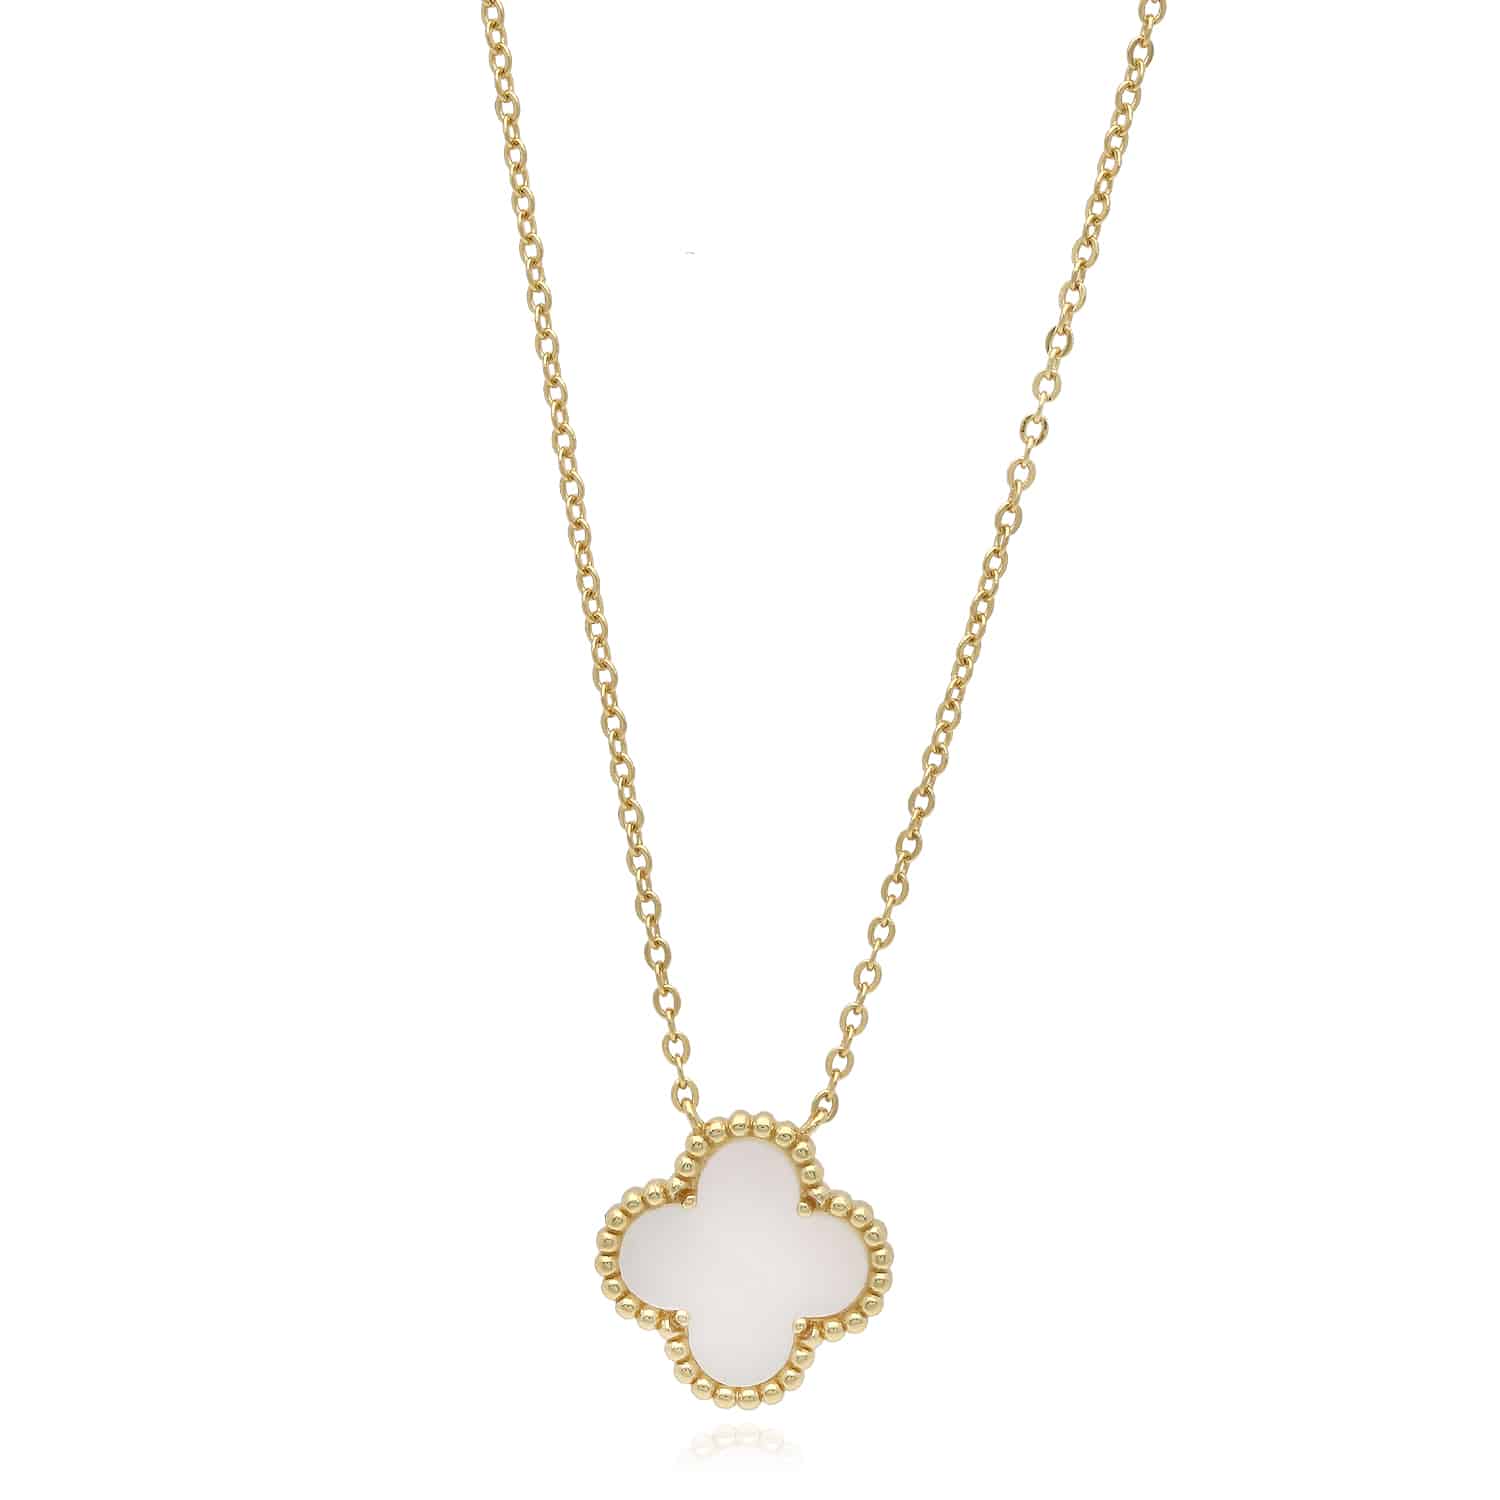 Yellow Gold Over Silver Gemstone Clover Leaf Pendant Necklace 16"-18" Adjustable - Pearl